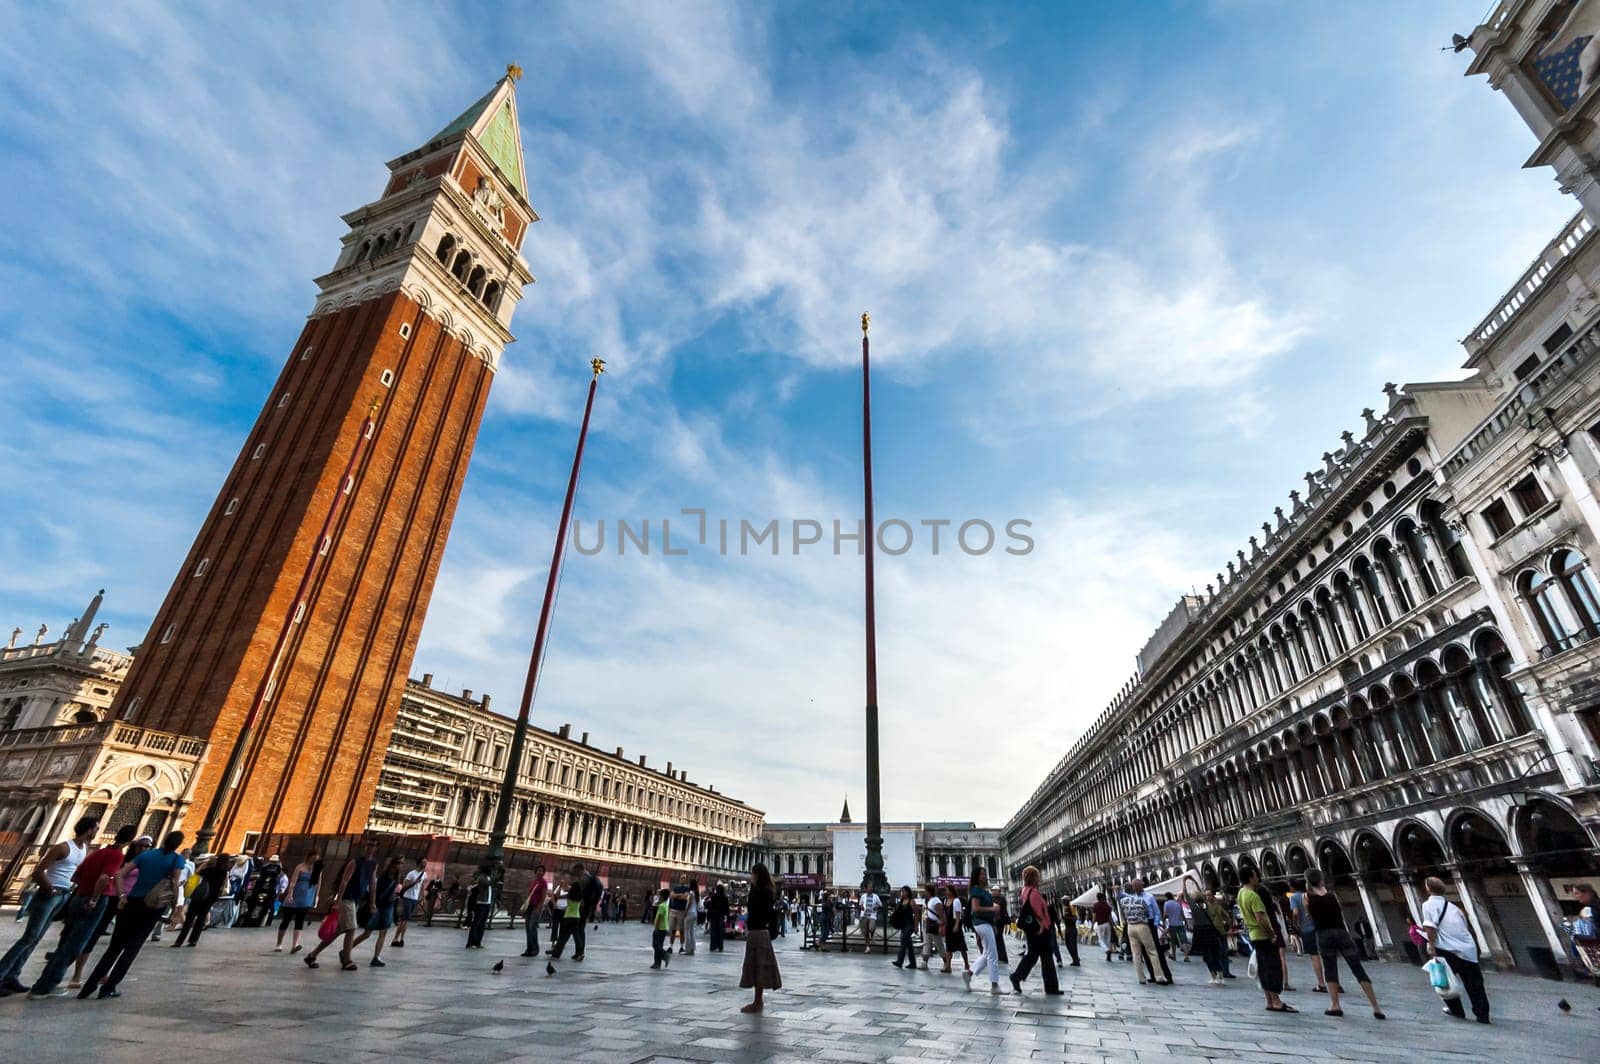 Tourists in San Marco square by Giamplume